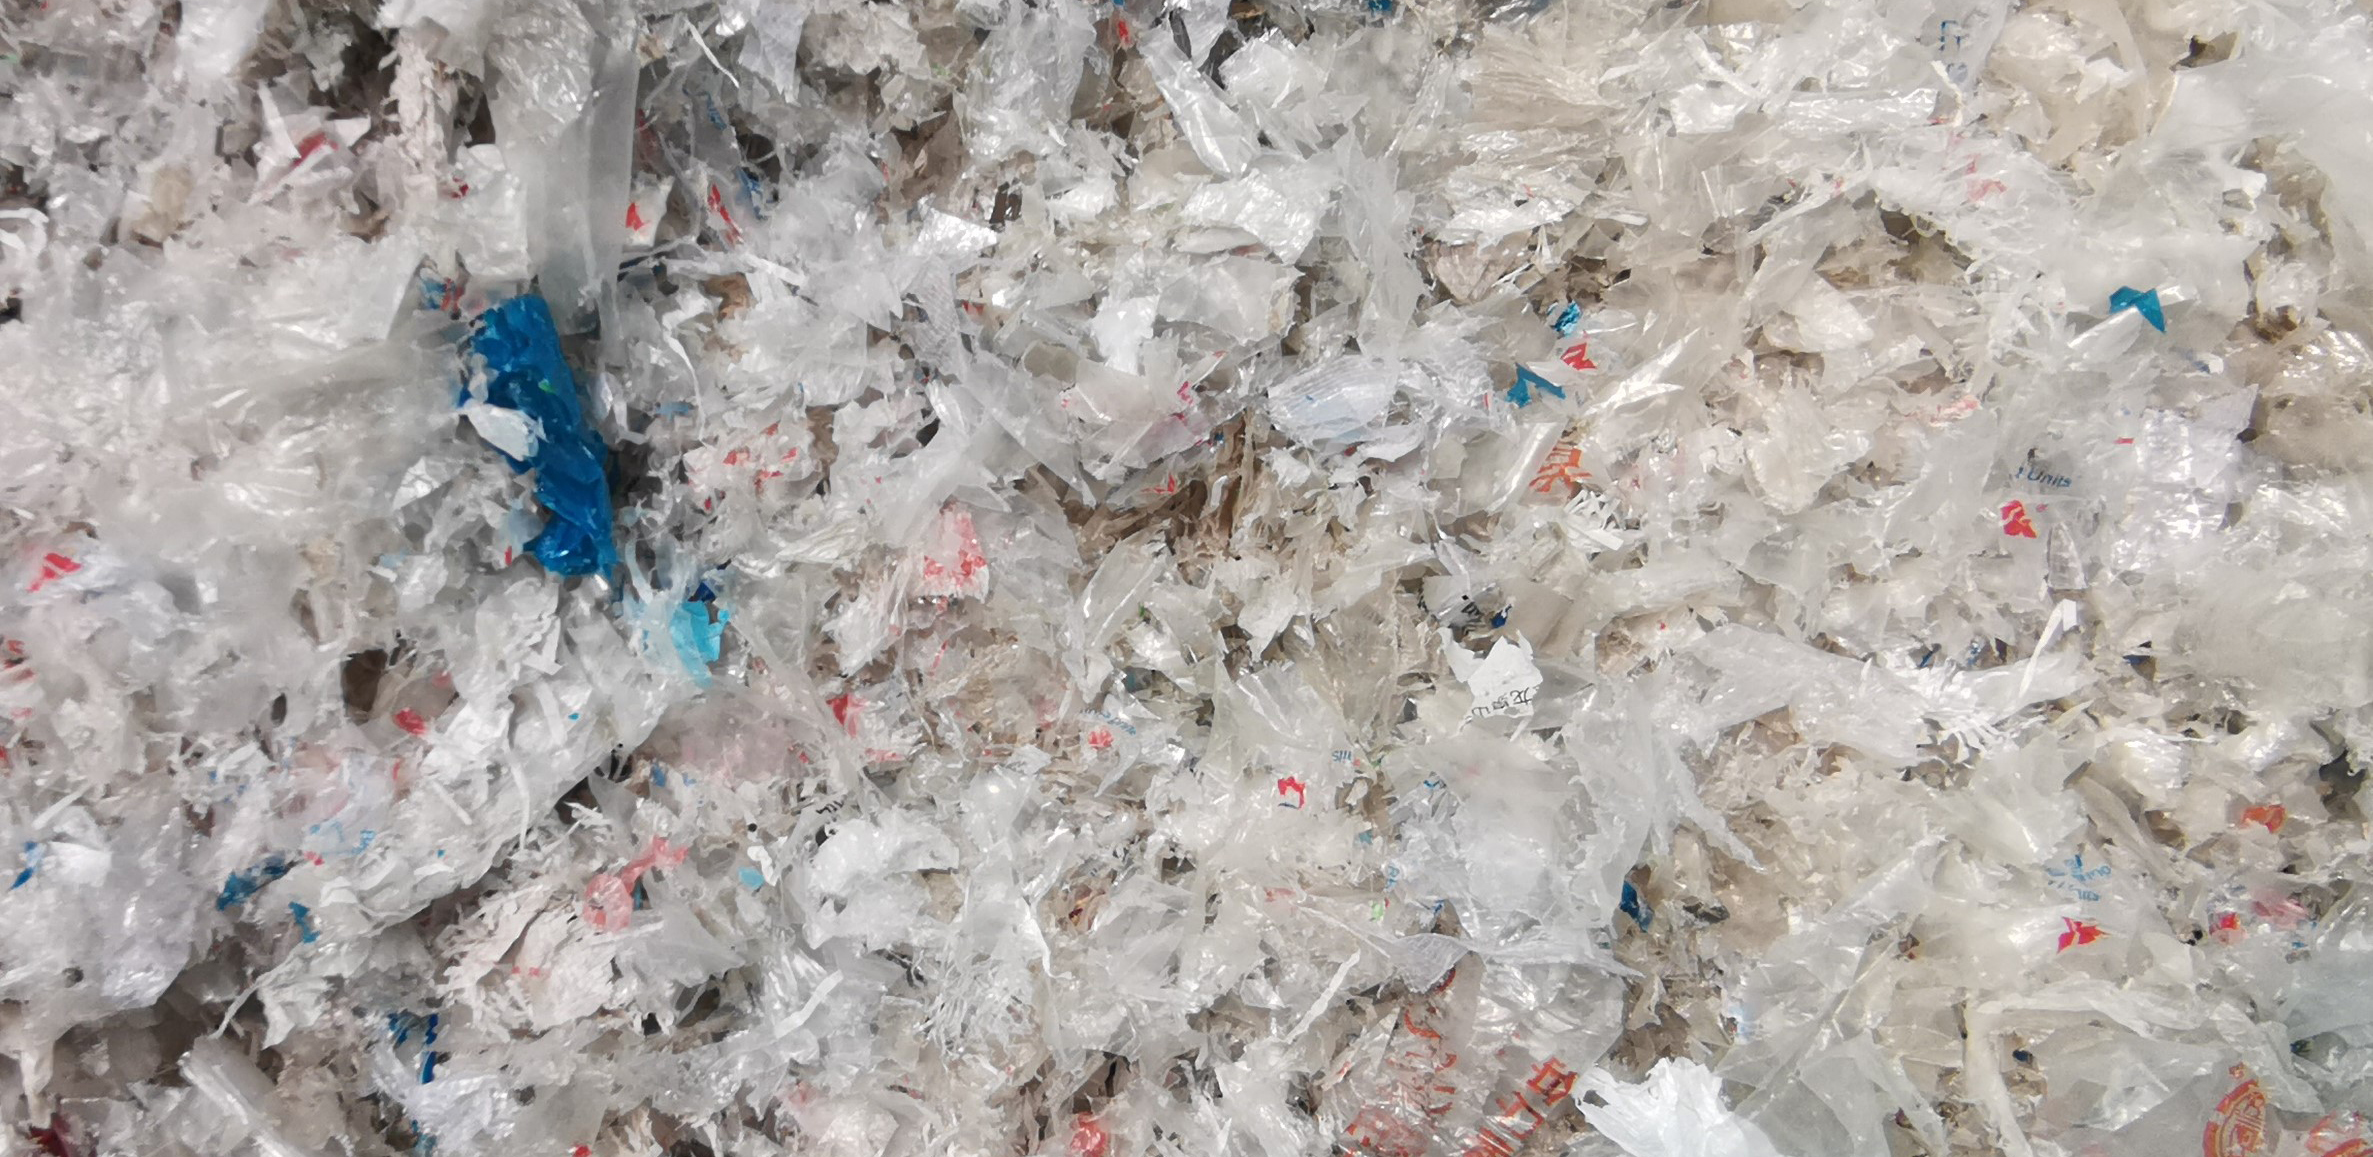 Continuous Pyrolysis of Waste plastic